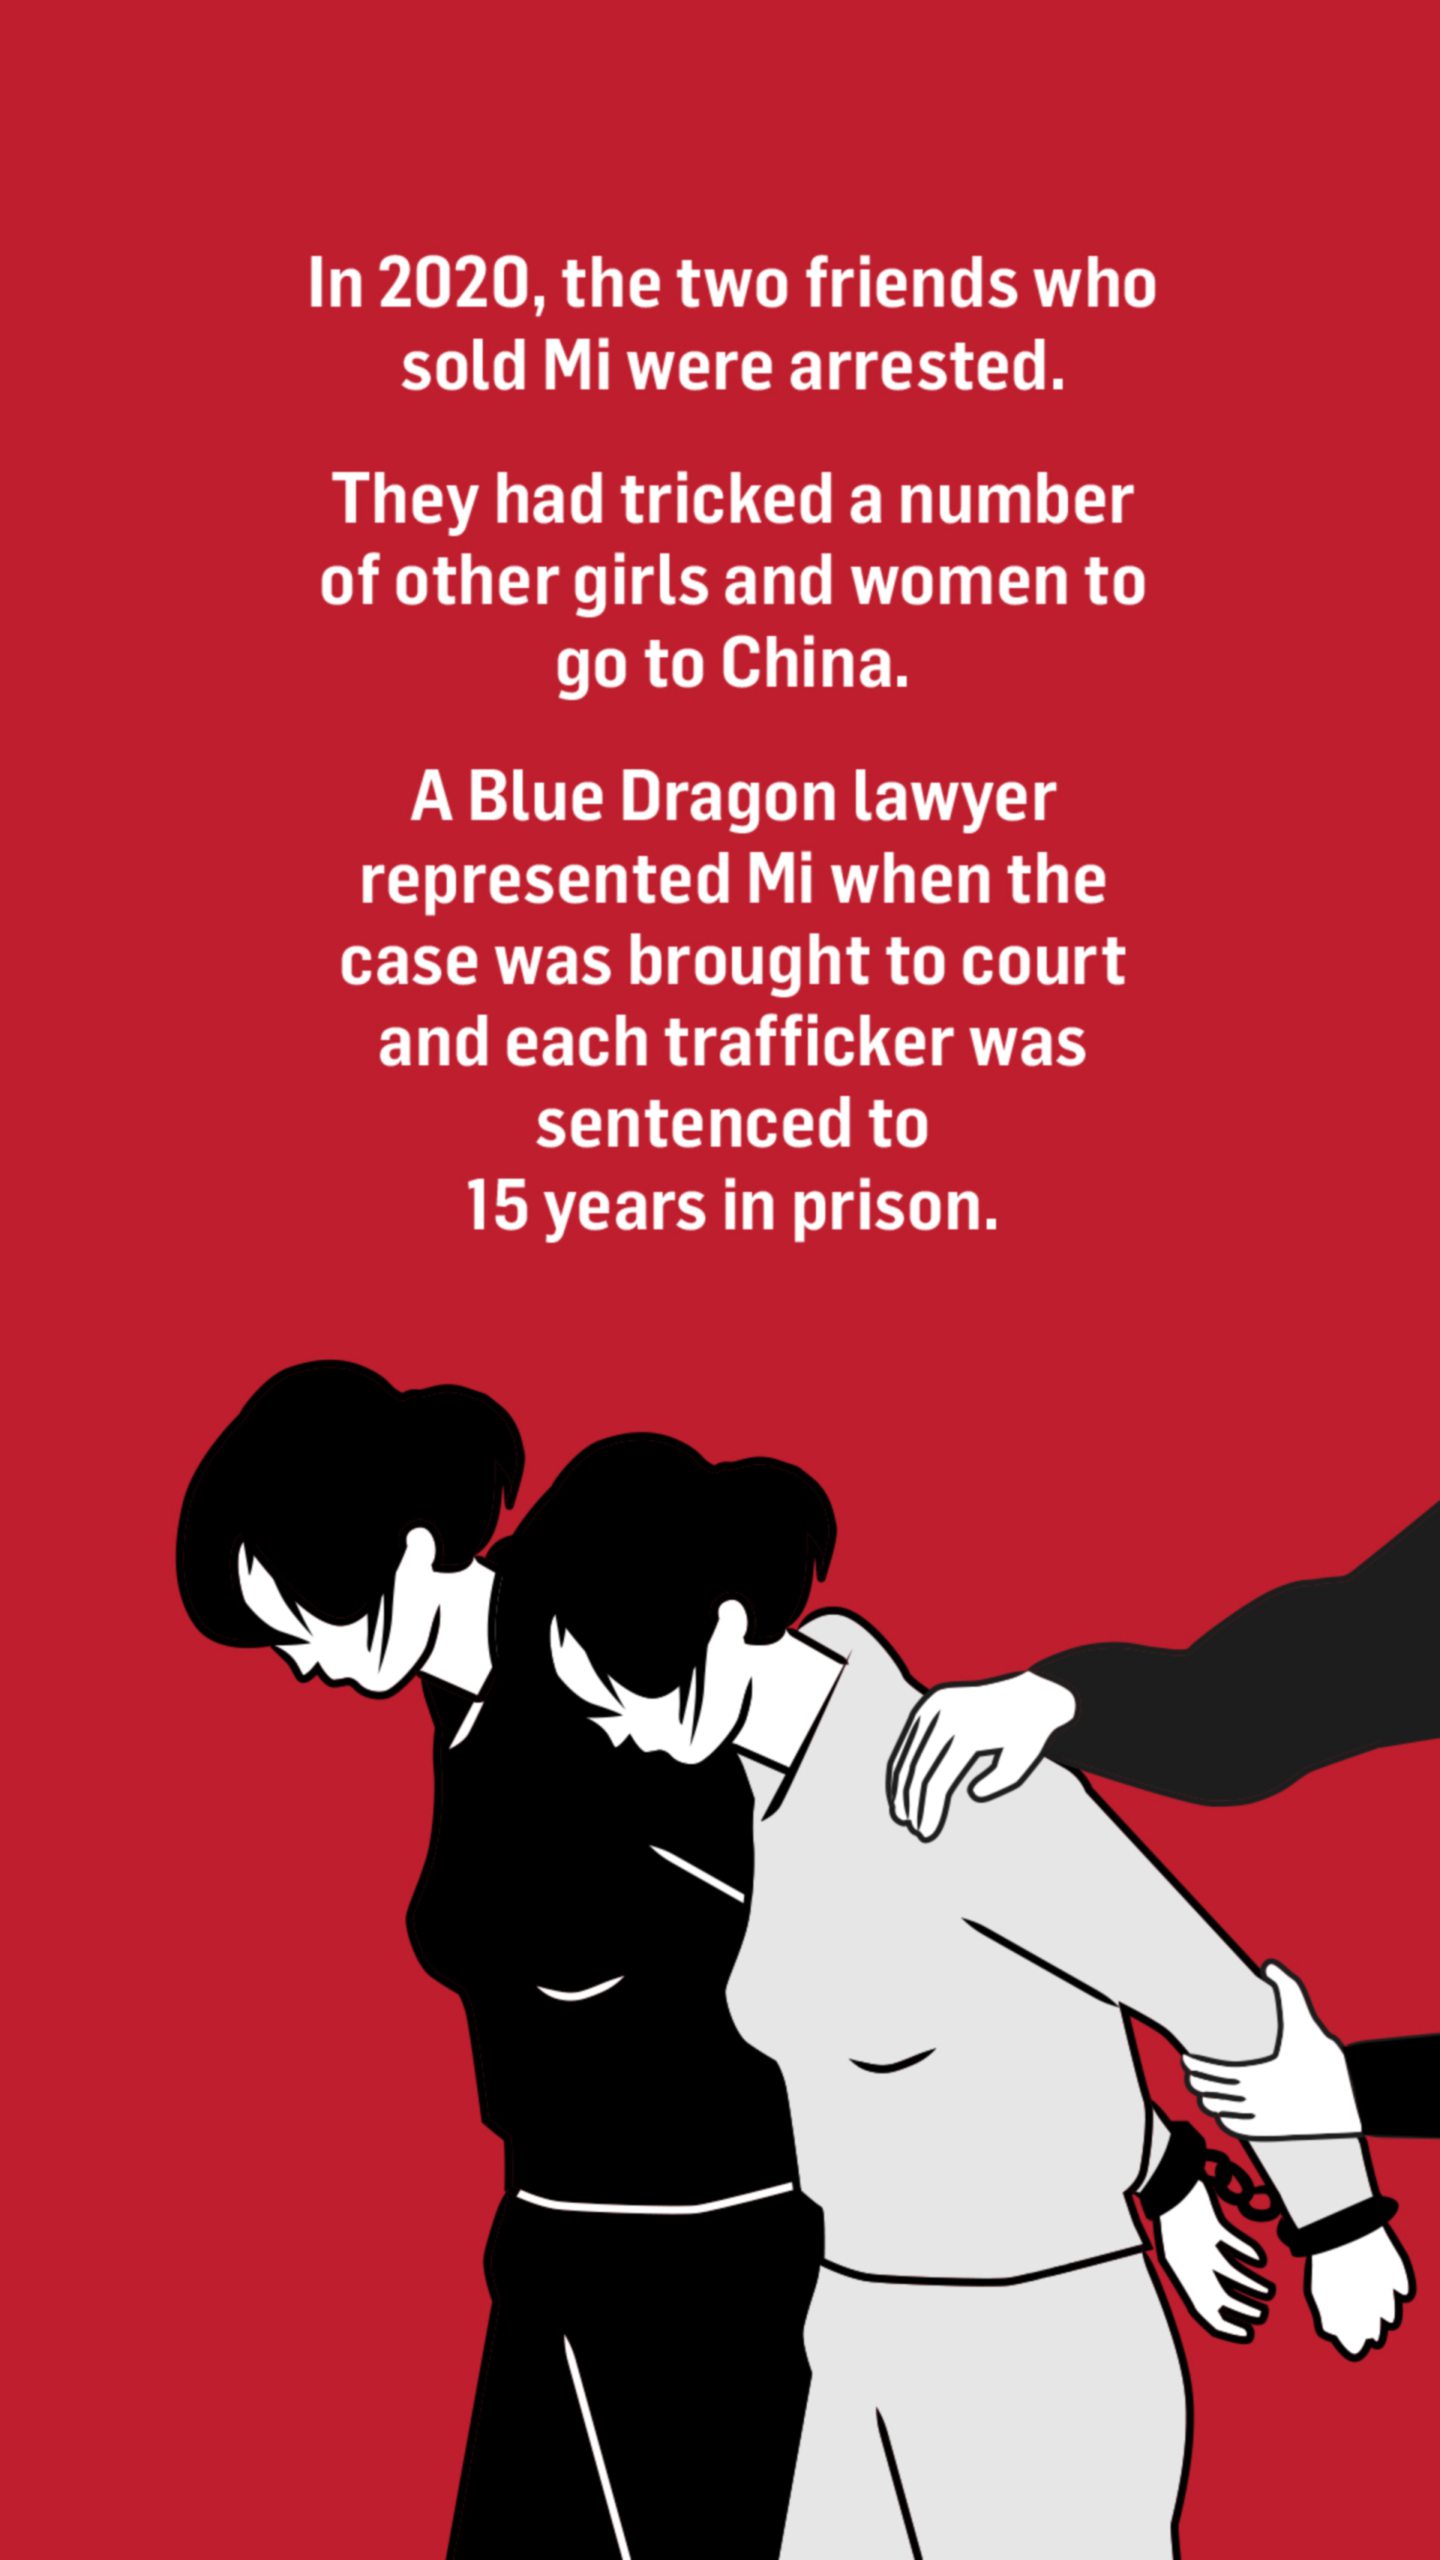 An illustration of two women being arrested. Words above the image read: In 2020, the two friends who sold Mi were arrested.

They had tricked a number of other girls and women to go to China.

A Blue Dragon lawyer represented Mi when the case was brought to court and each trafficker was sentenced to 15 years in prison.